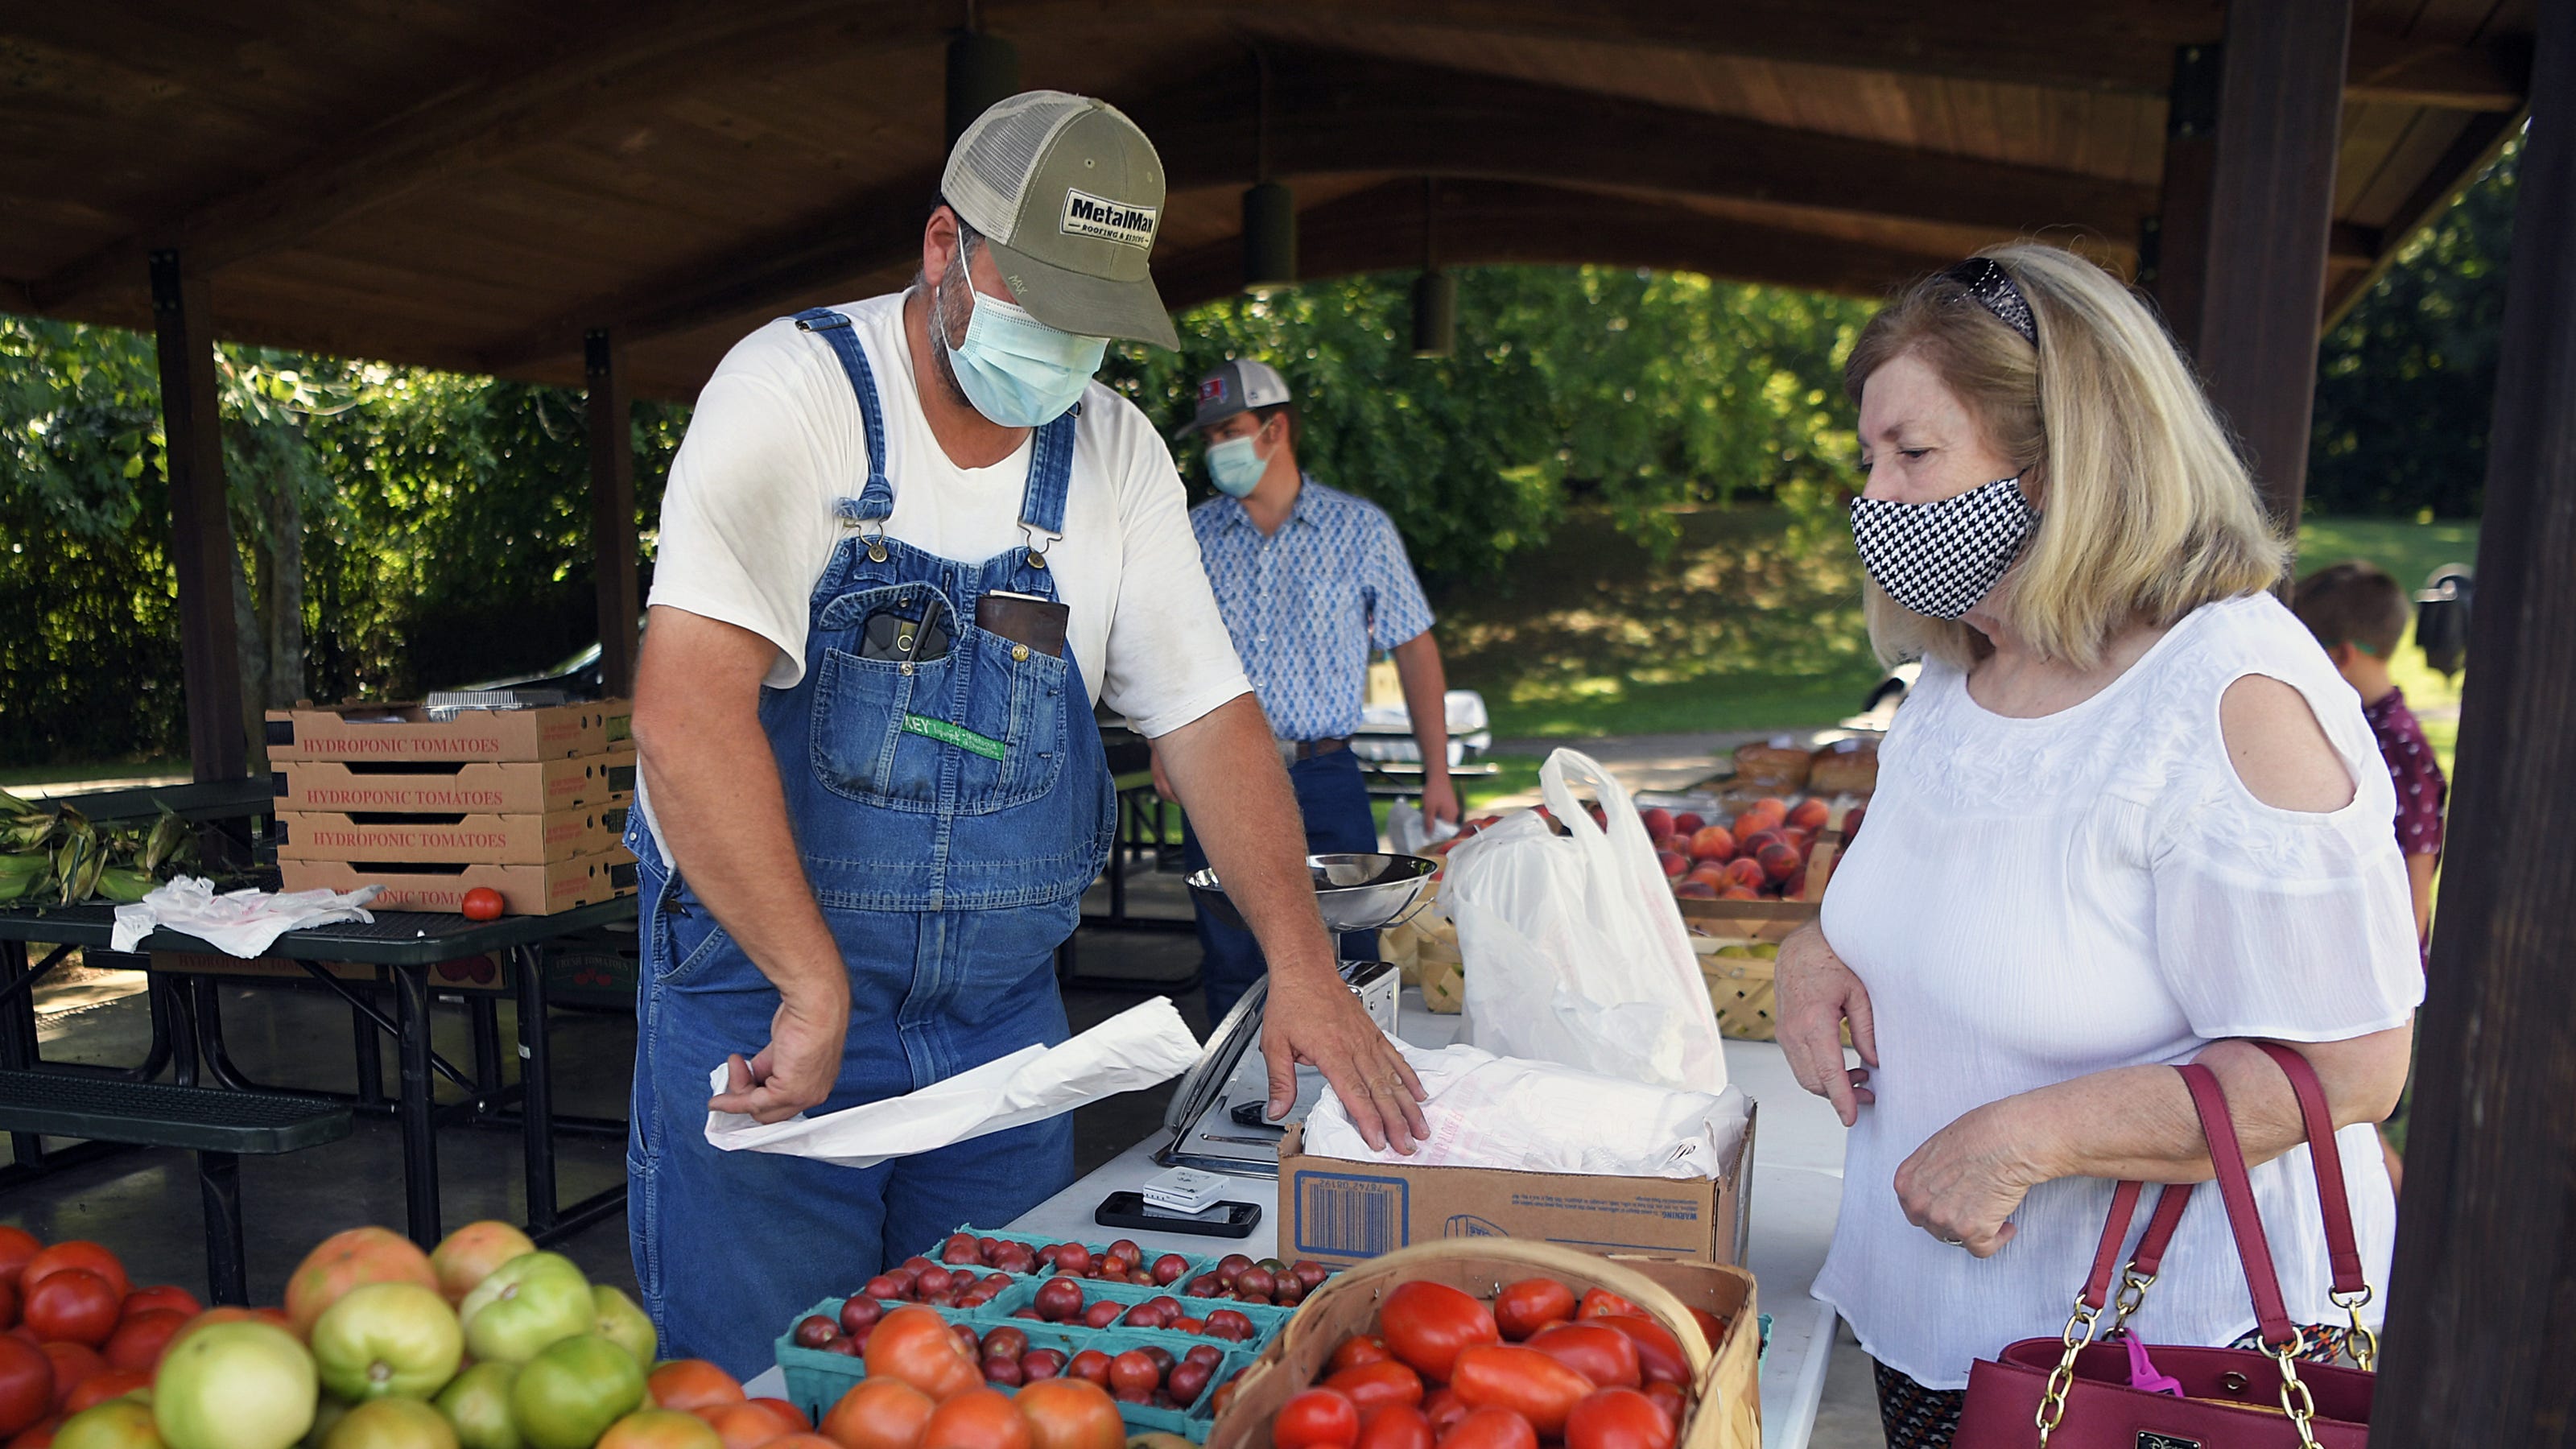 Support Tennessee's farmers in their pivotal role in fight against climate change | Opinion - Commercial Appeal